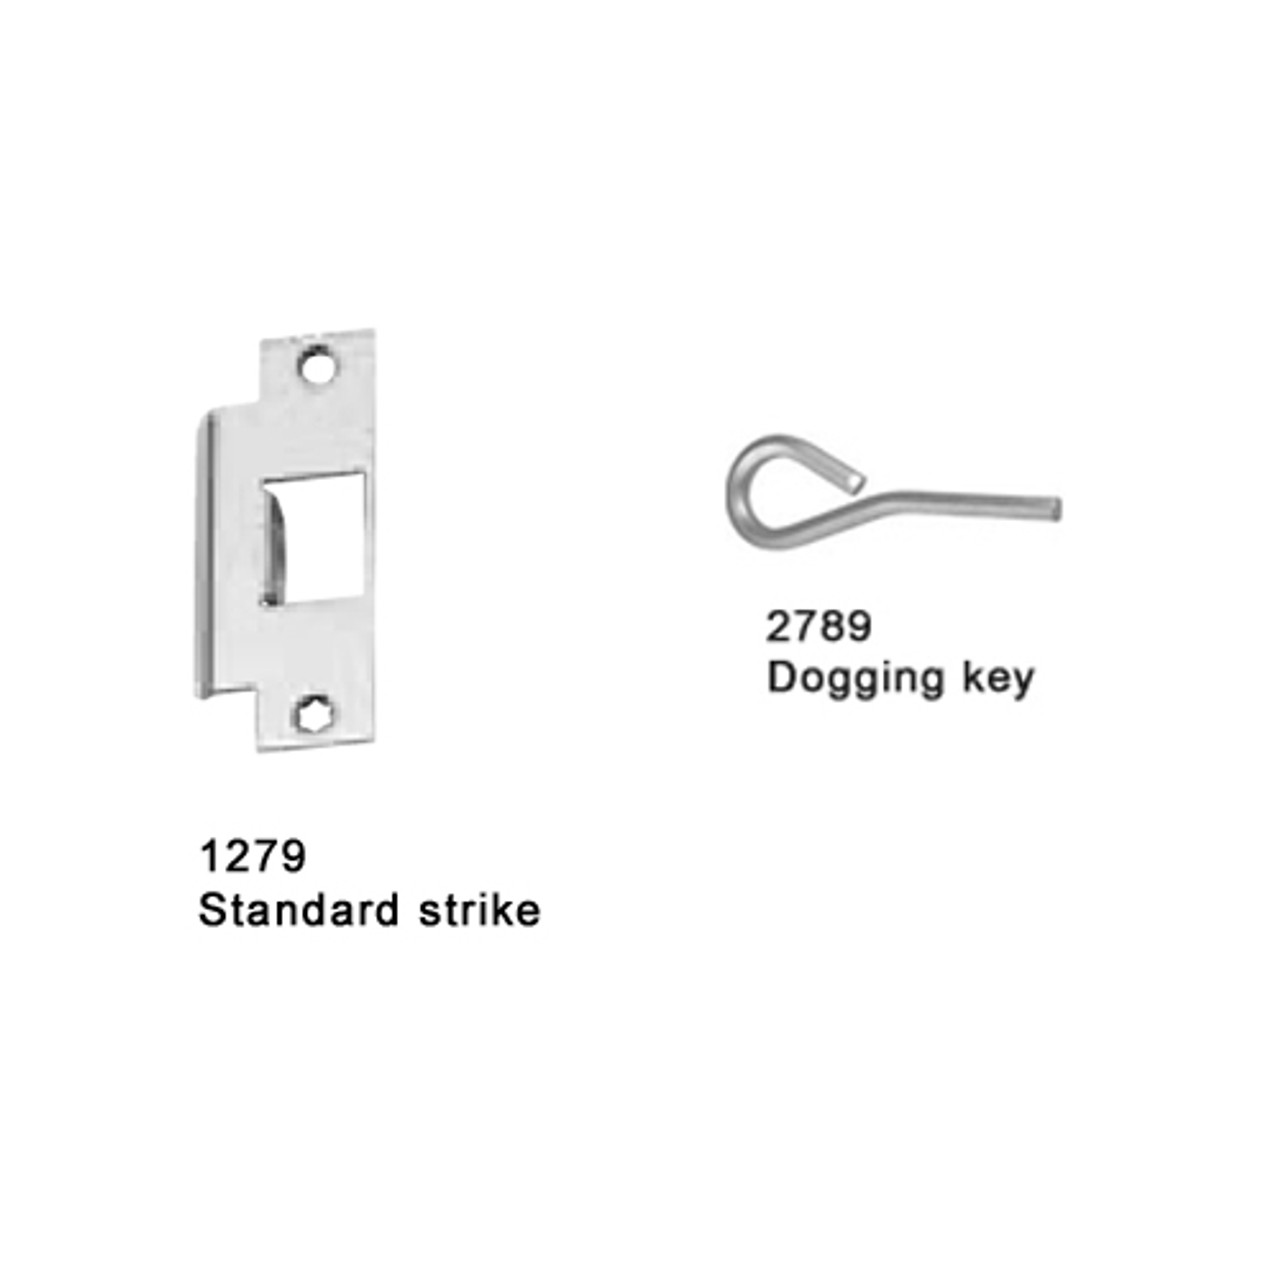 25-M-TP-US3-4-LHR Falcon 25 Series Mortise Lock Devices with 512TP Thumbpiece Trim in Polished Brass